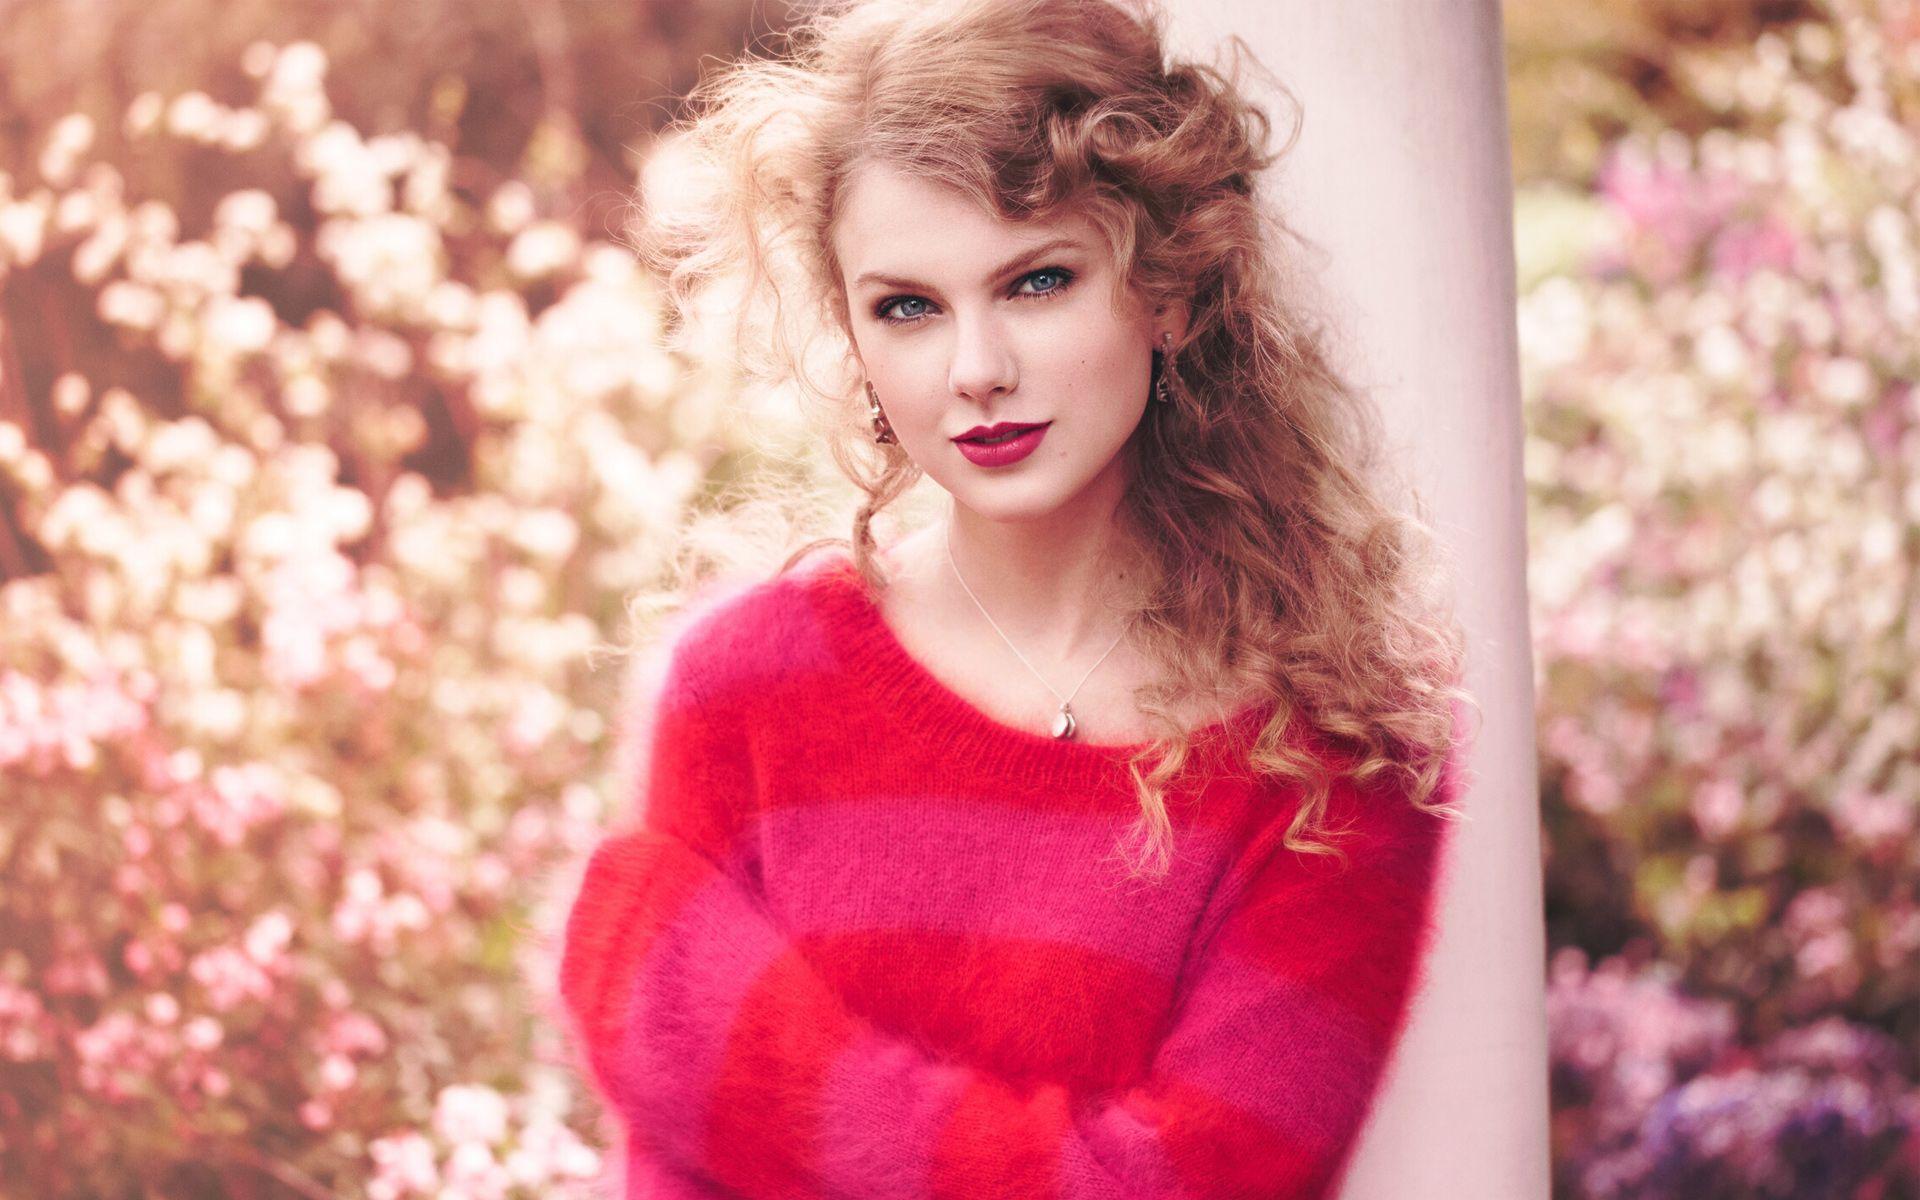 Taylor Swift Wallpapers Top Free Taylor Swift Backgrounds